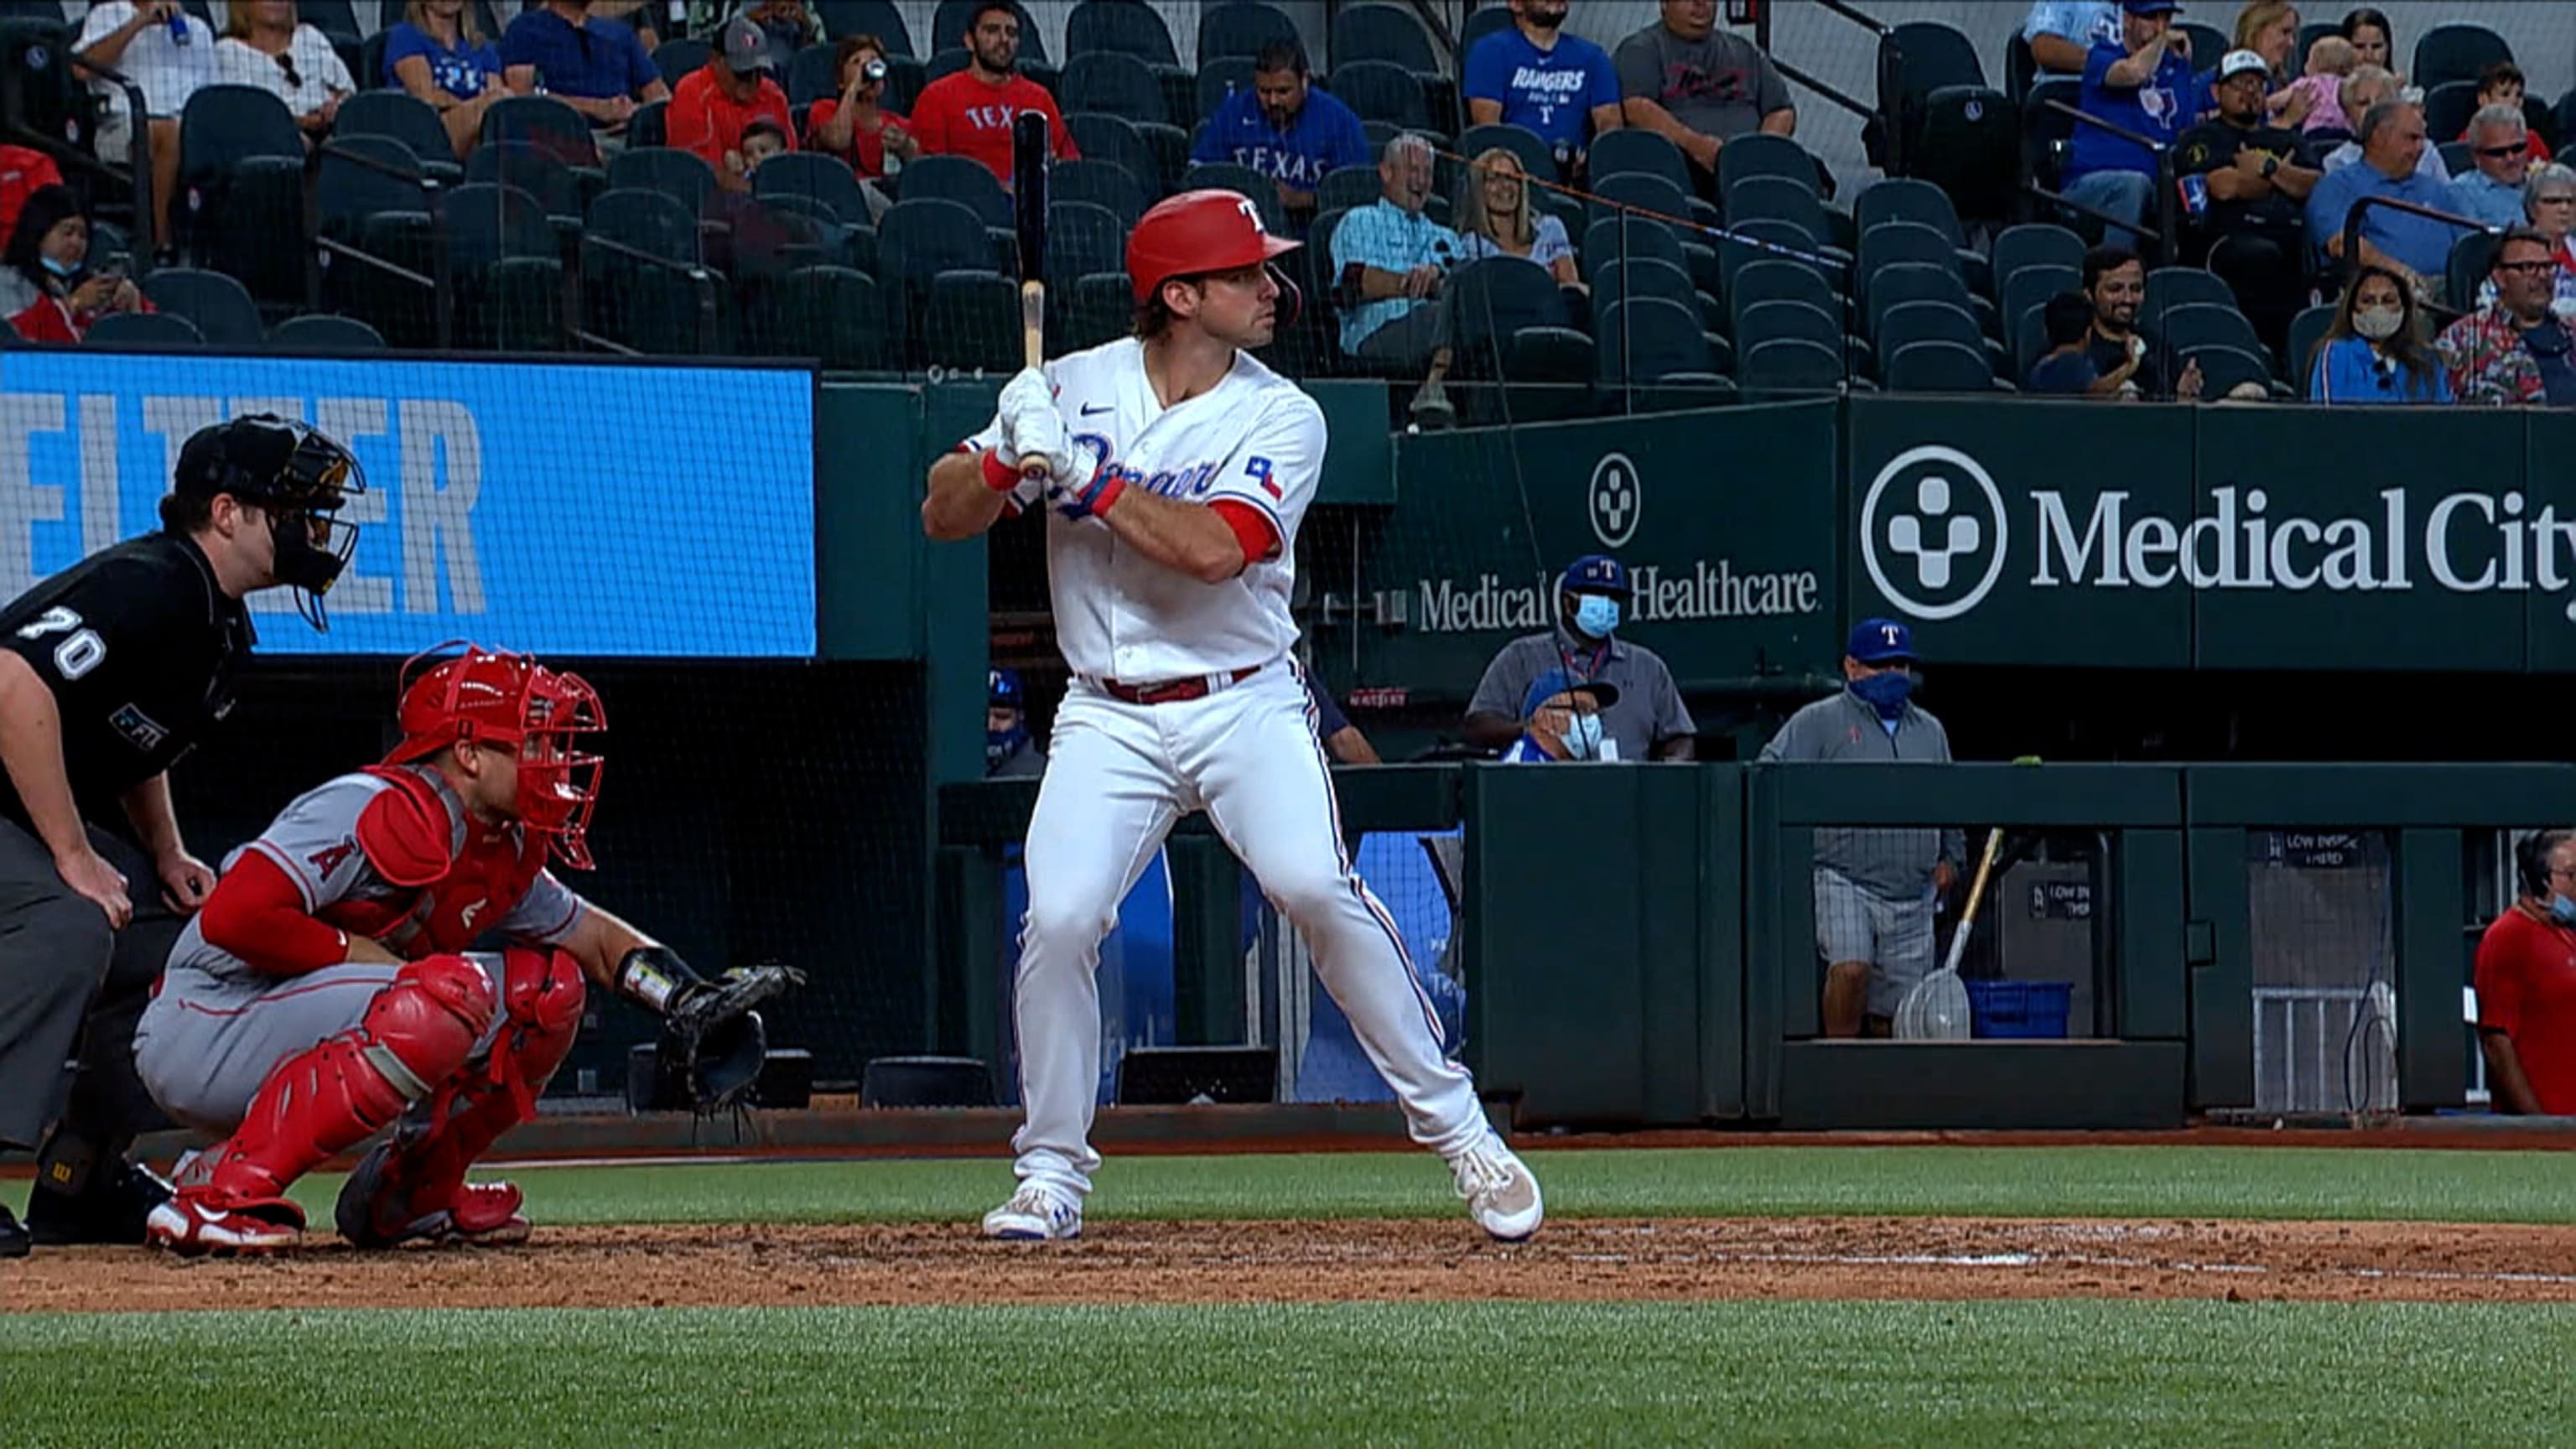 Ten great highlights (already) by Texas Rangers rookie Adolis